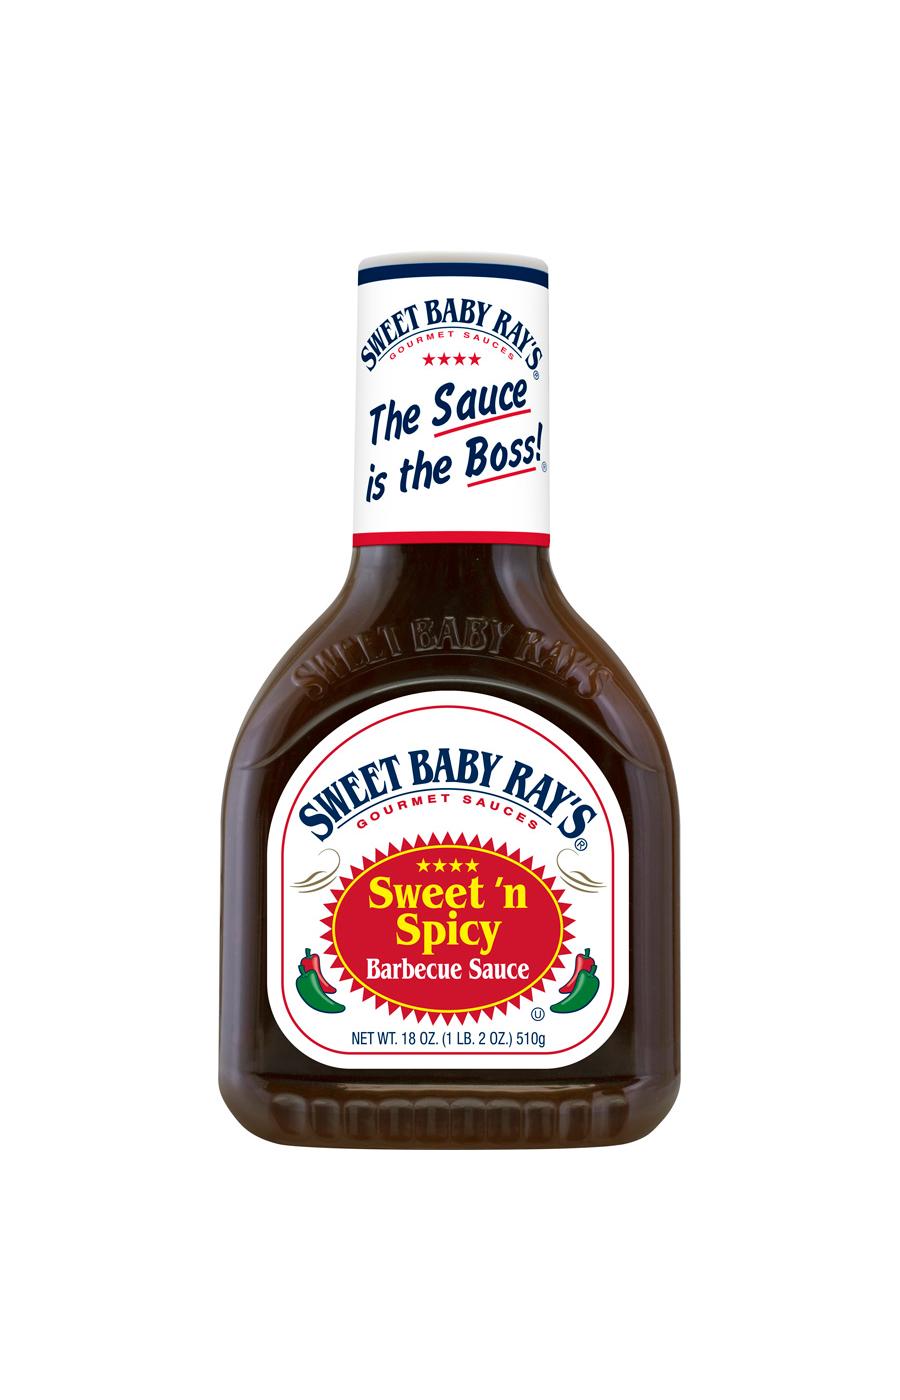 Sweet Baby Ray's Sweet 'n Spicy Barbecue Sauce; image 1 of 4